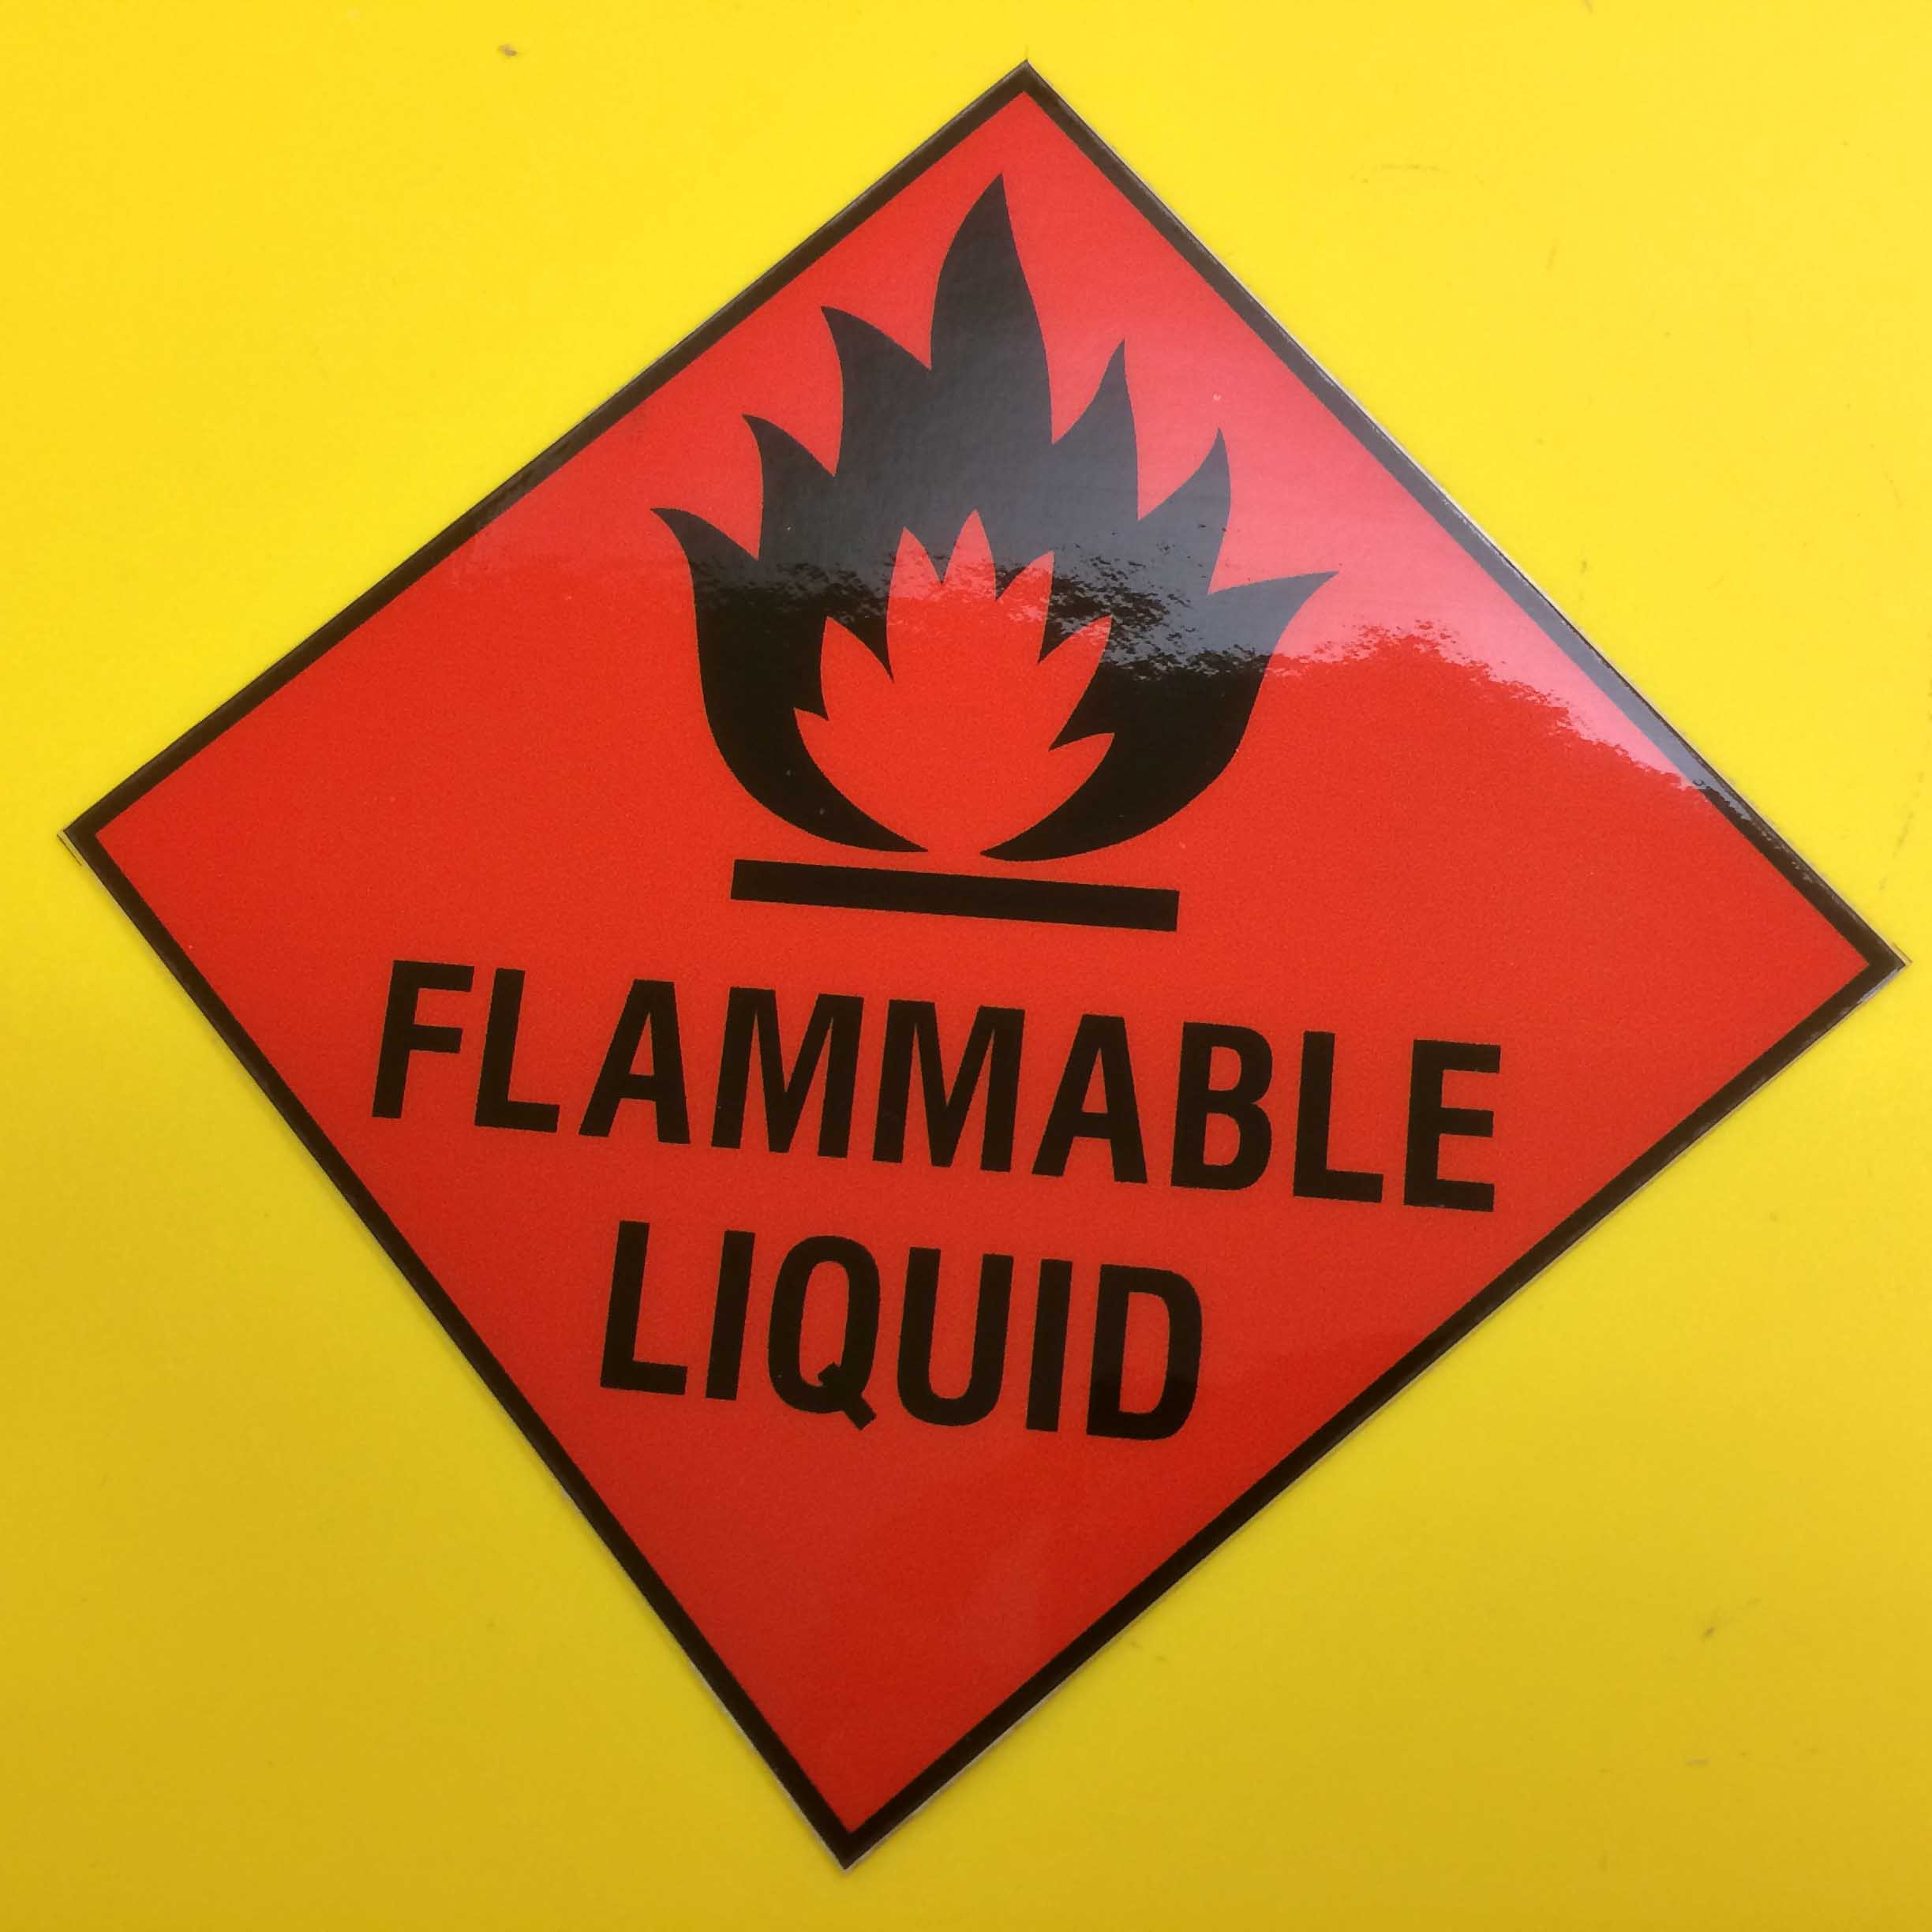 Black flames at the top. Below is Flammable Liquid in black capitals. Red, diamond shaped sticker edged in black.